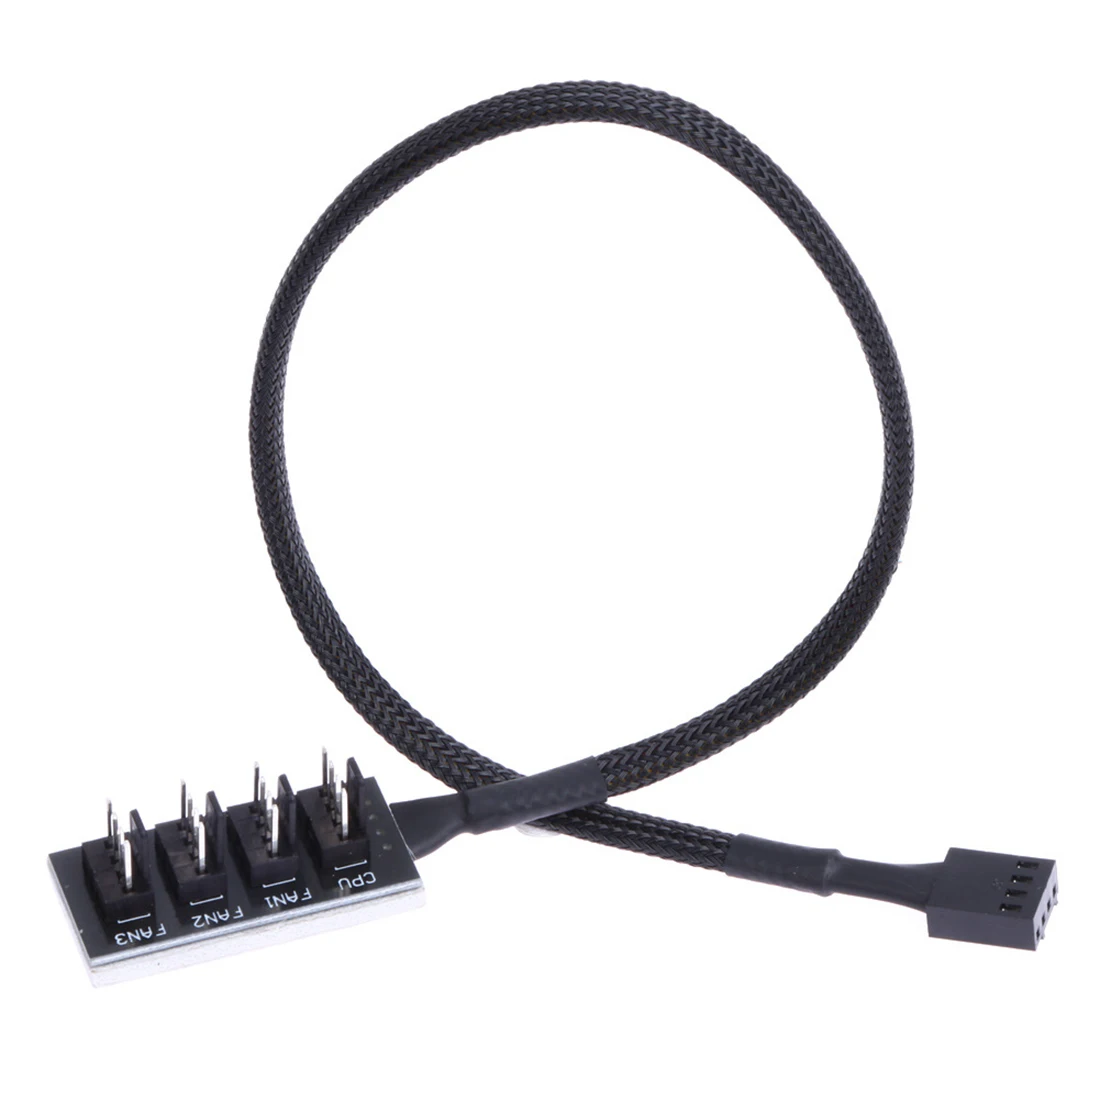 

Braided Power Cable 1 to 5 / 4 Pins TX4 PWM CPU Cooler Computer Chasis Cooling Fan Hub Splitter Adapter Wire 35cm for PC